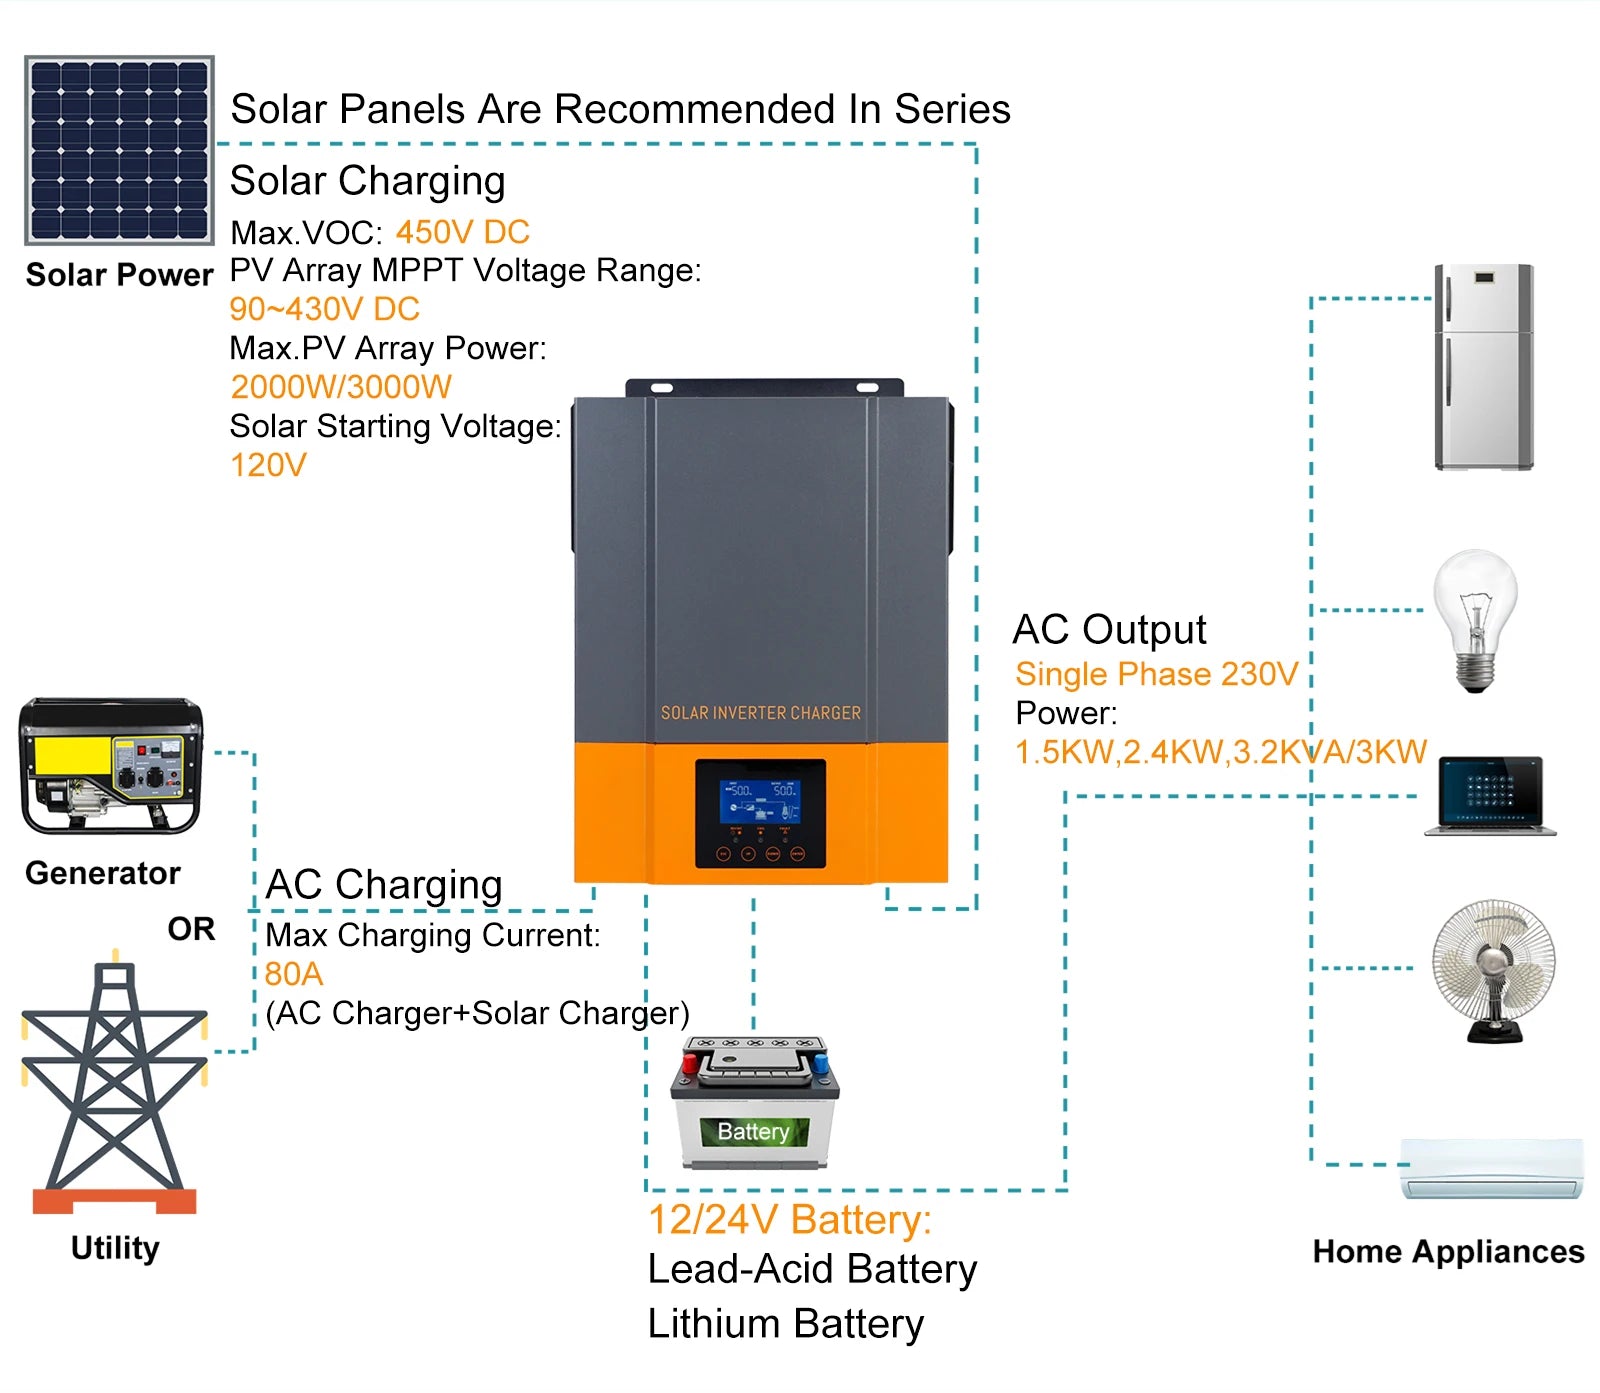 PowMr Hybrid Solar Inverter, MPPT charger for solar panels in series, supports up to 450V DC input and 2000W power output.